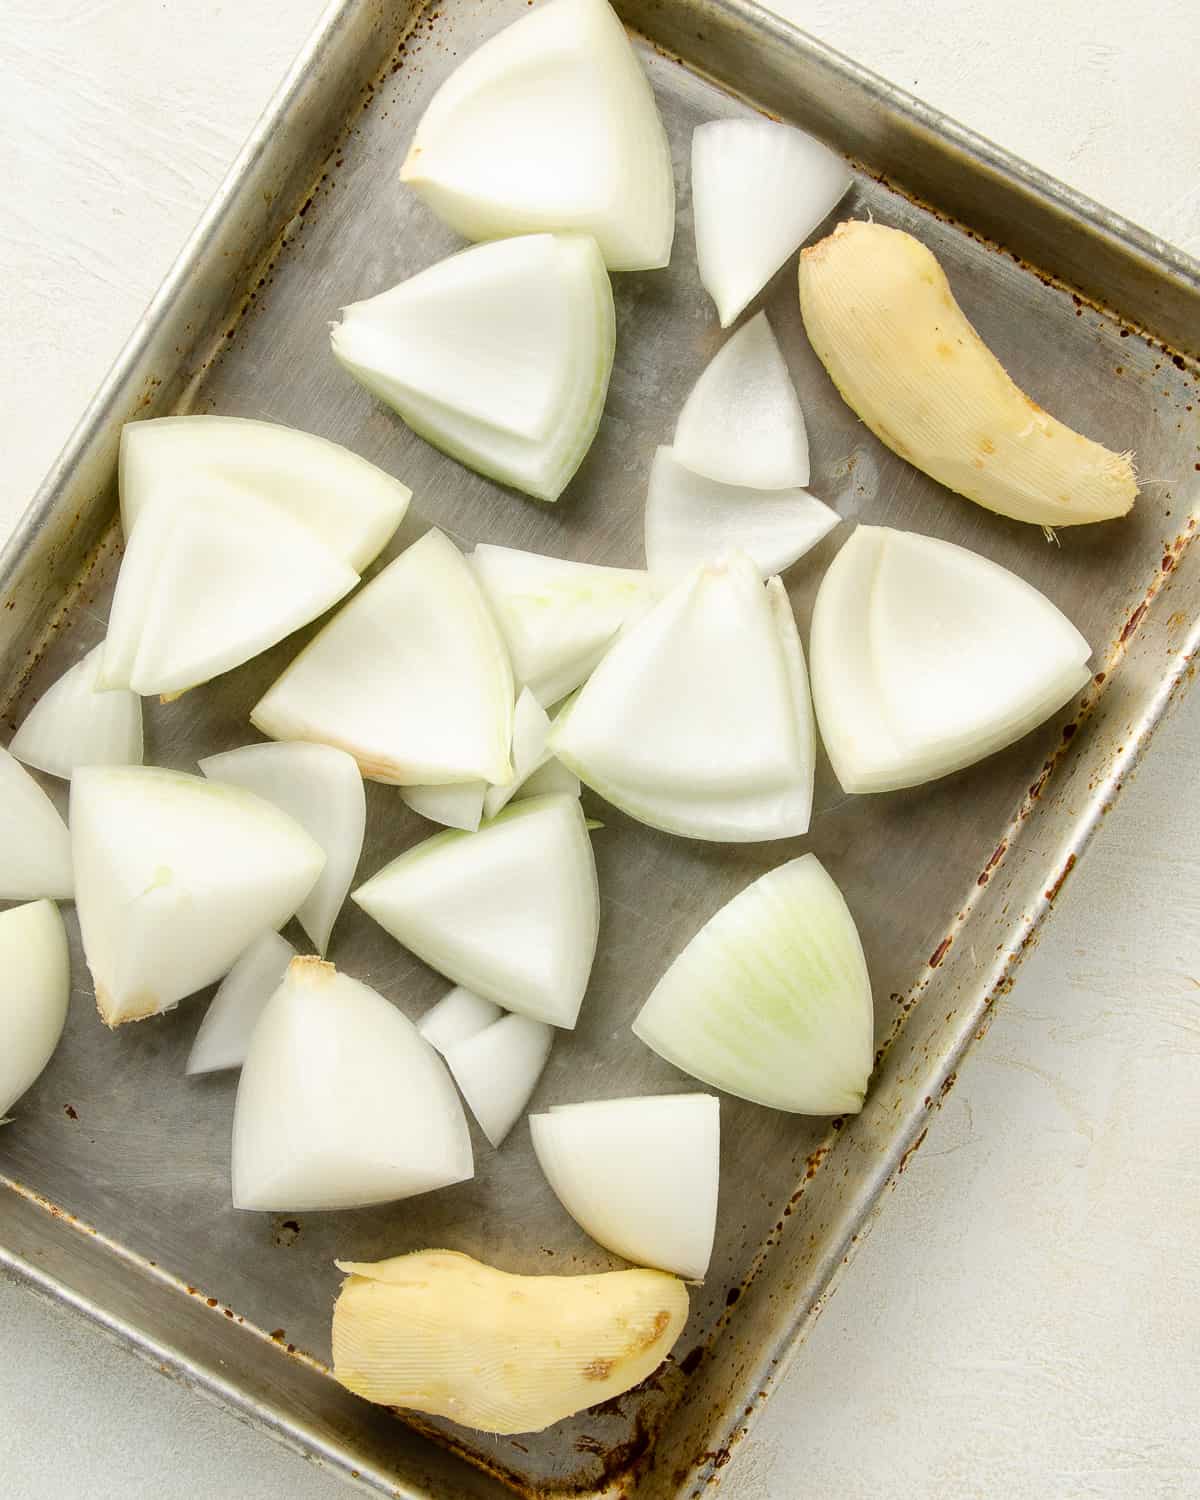 Chopped onions and ginger root on a sheet tray to broil. This helps give flavor to the broth.